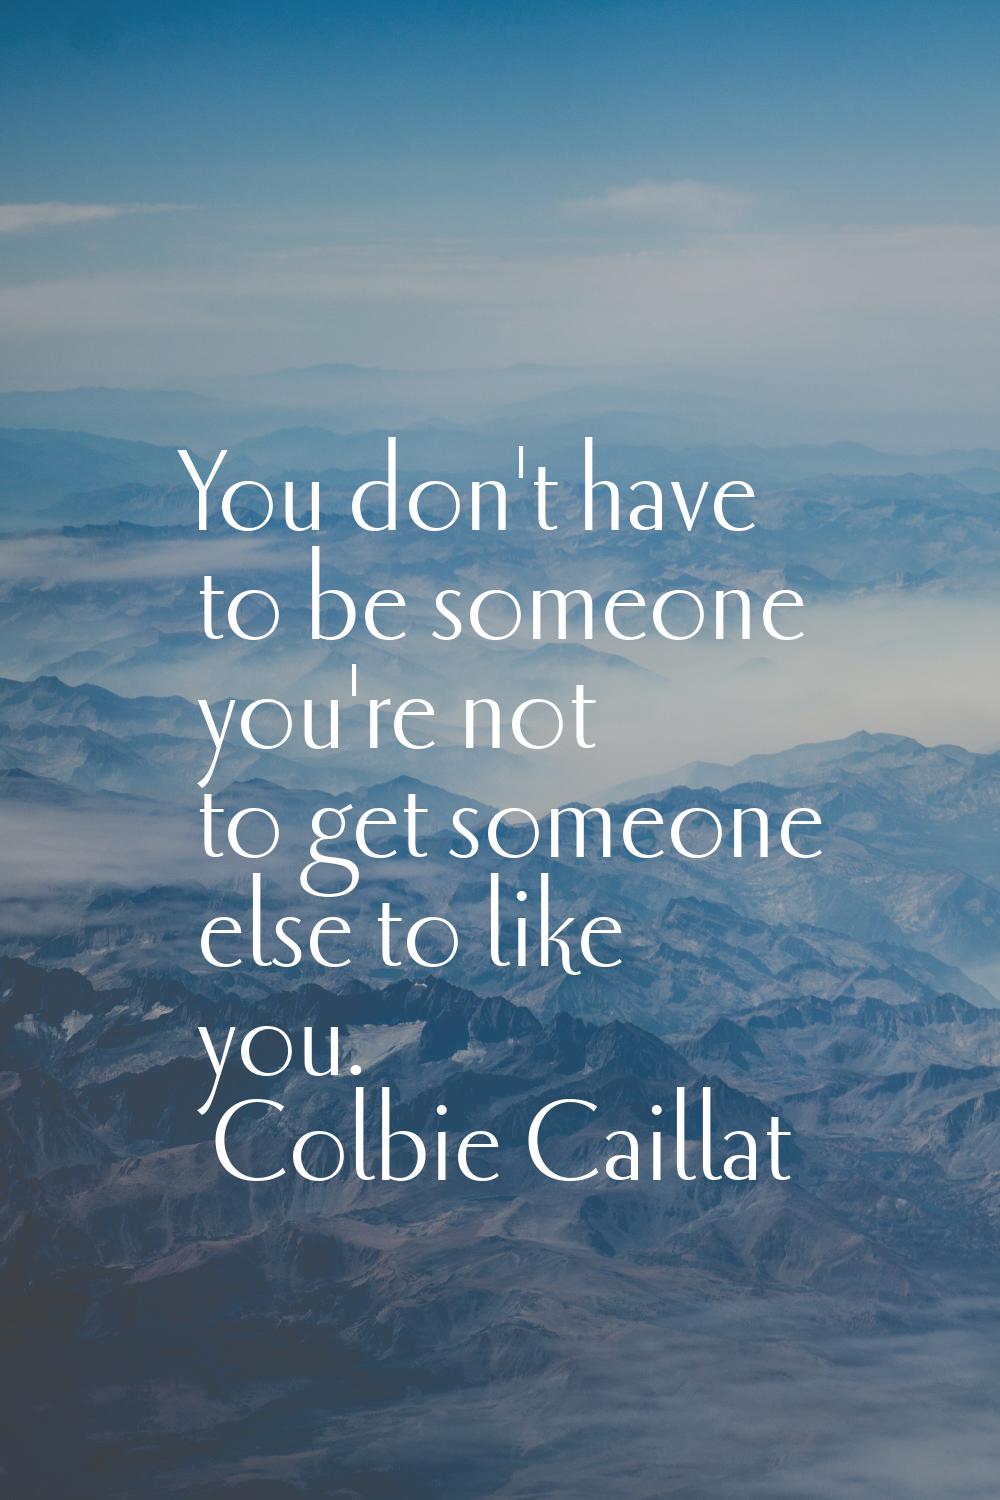 You don't have to be someone you're not to get someone else to like you.